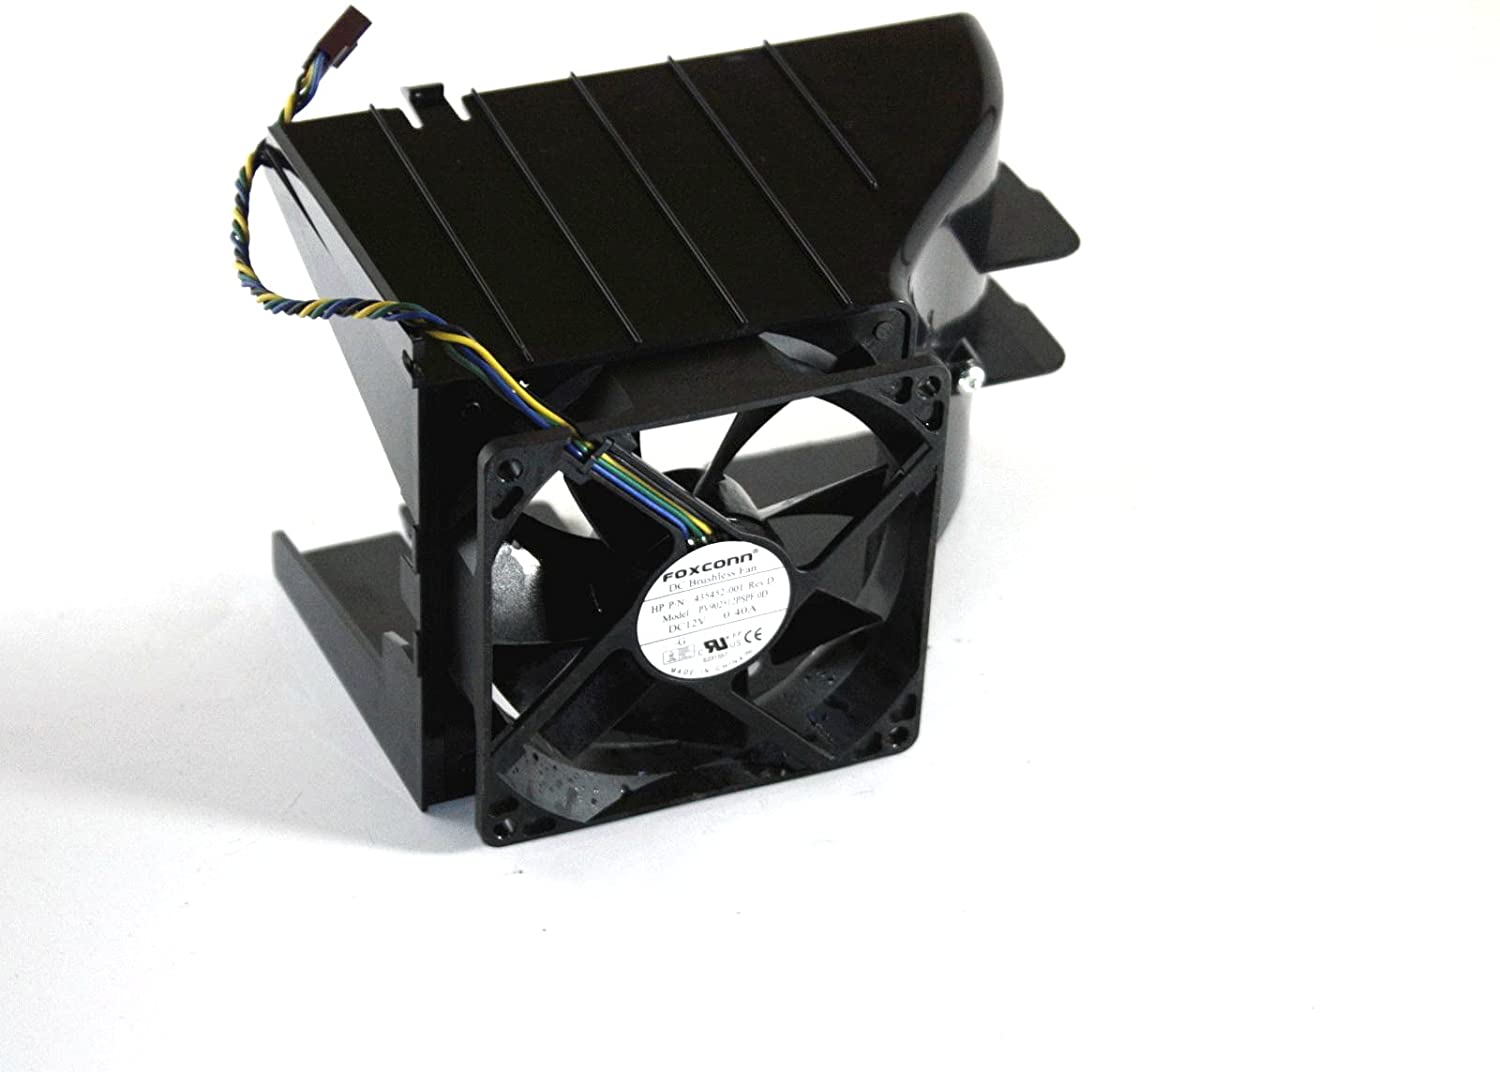 Genuine Foxconn HP DC5750 DC5800 DC5850 Computer Case Cooling Fan with Airflow Fan Guides Assembly P1-452251 435452-001